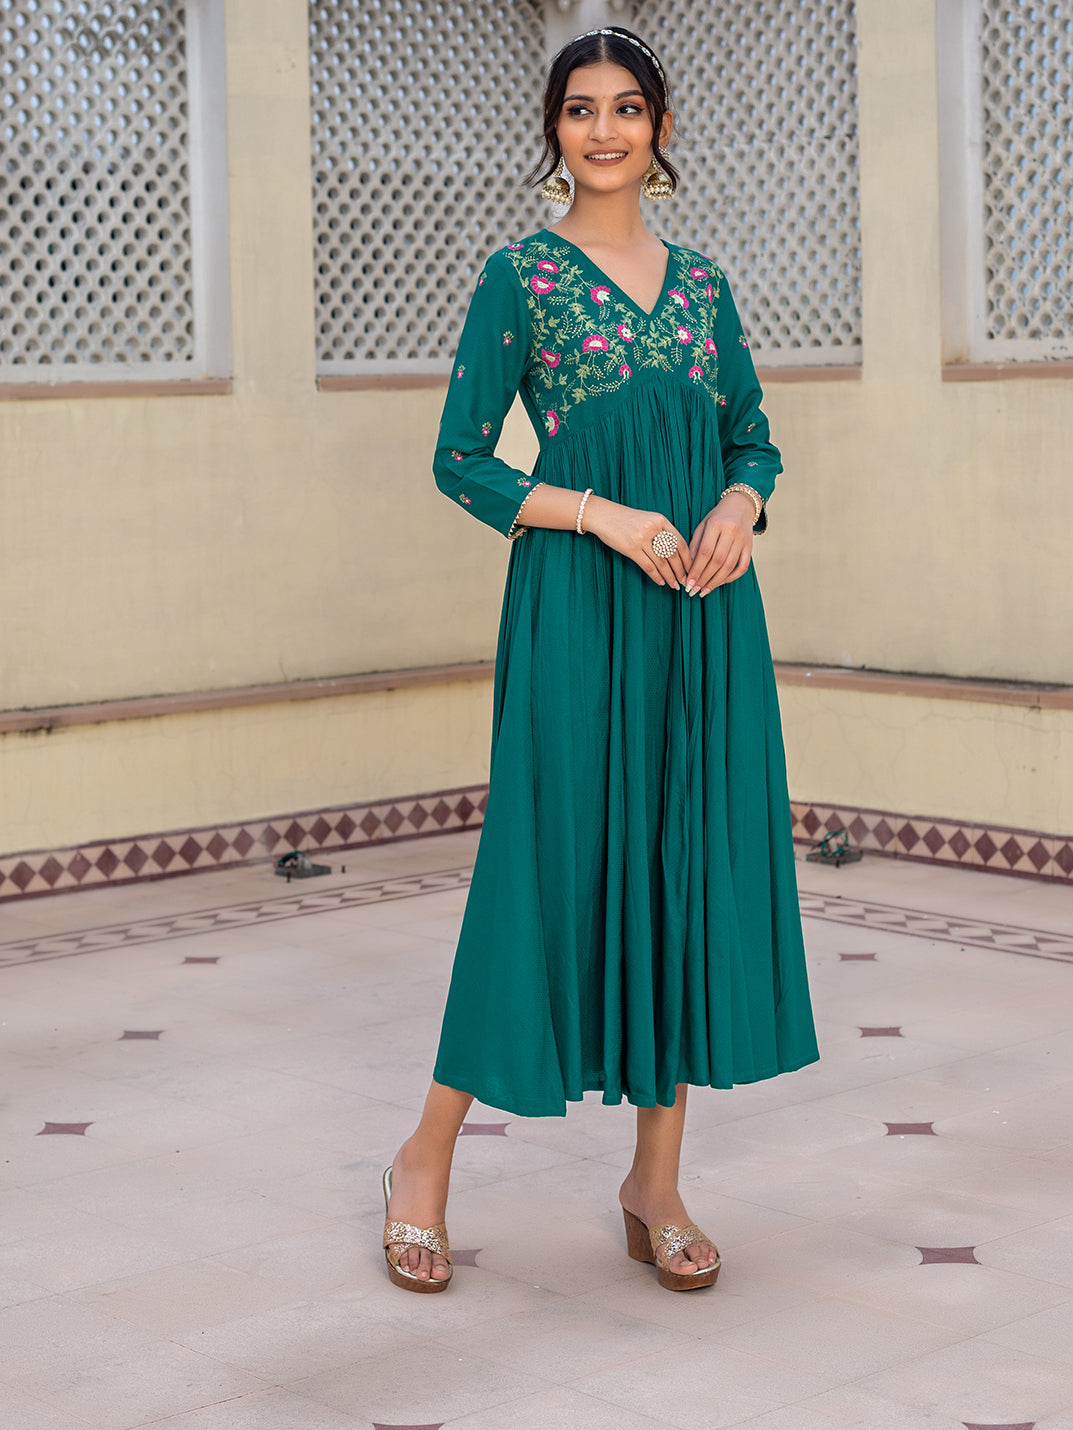 this-floral-embroidered-v-neck-green-a-line-dress-is-a-stunning-addition-to-your-wardrobe-this-dress-features-multicolor-embroidery-creating-a-unique-look-that-will-stand-out-in-any-setting